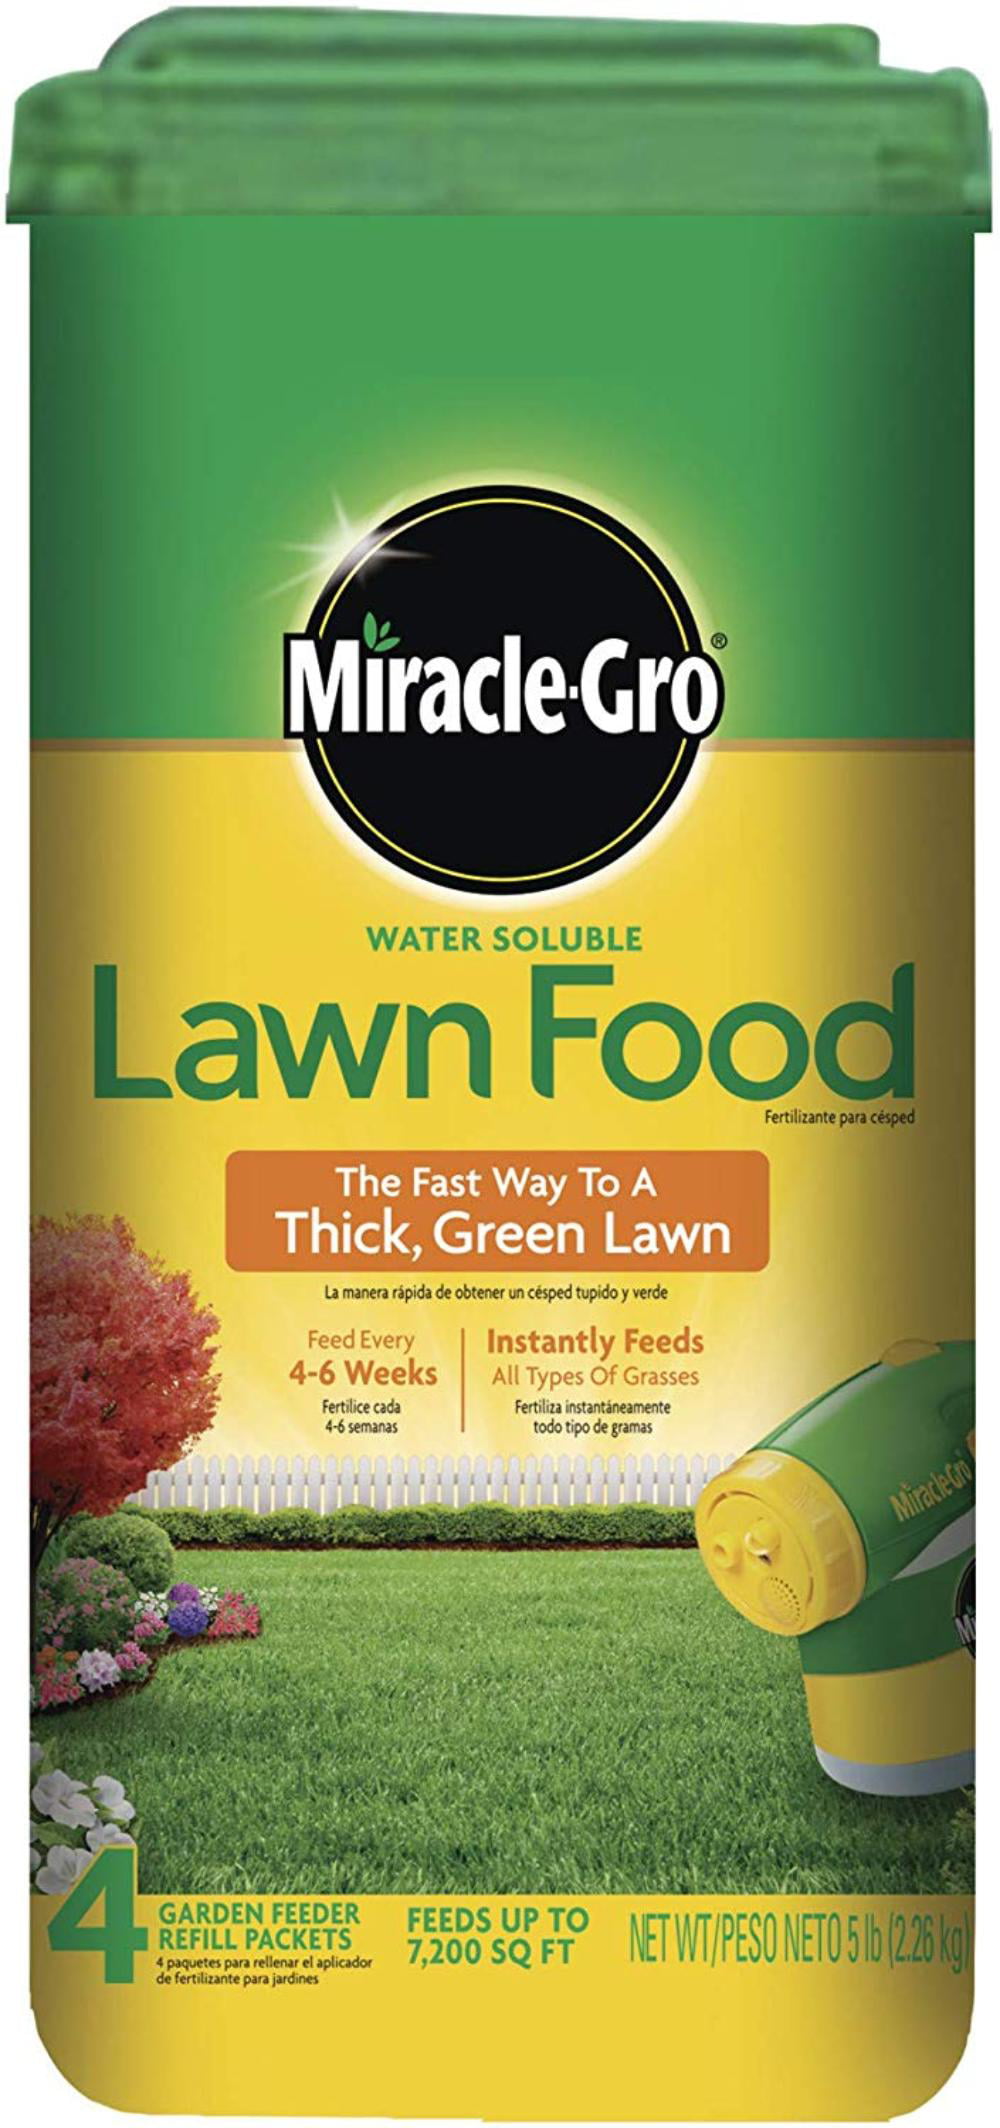 Miracle-Gro 1001834 Water Soluble 5 lbs Lawn Food, Instantly feeds all